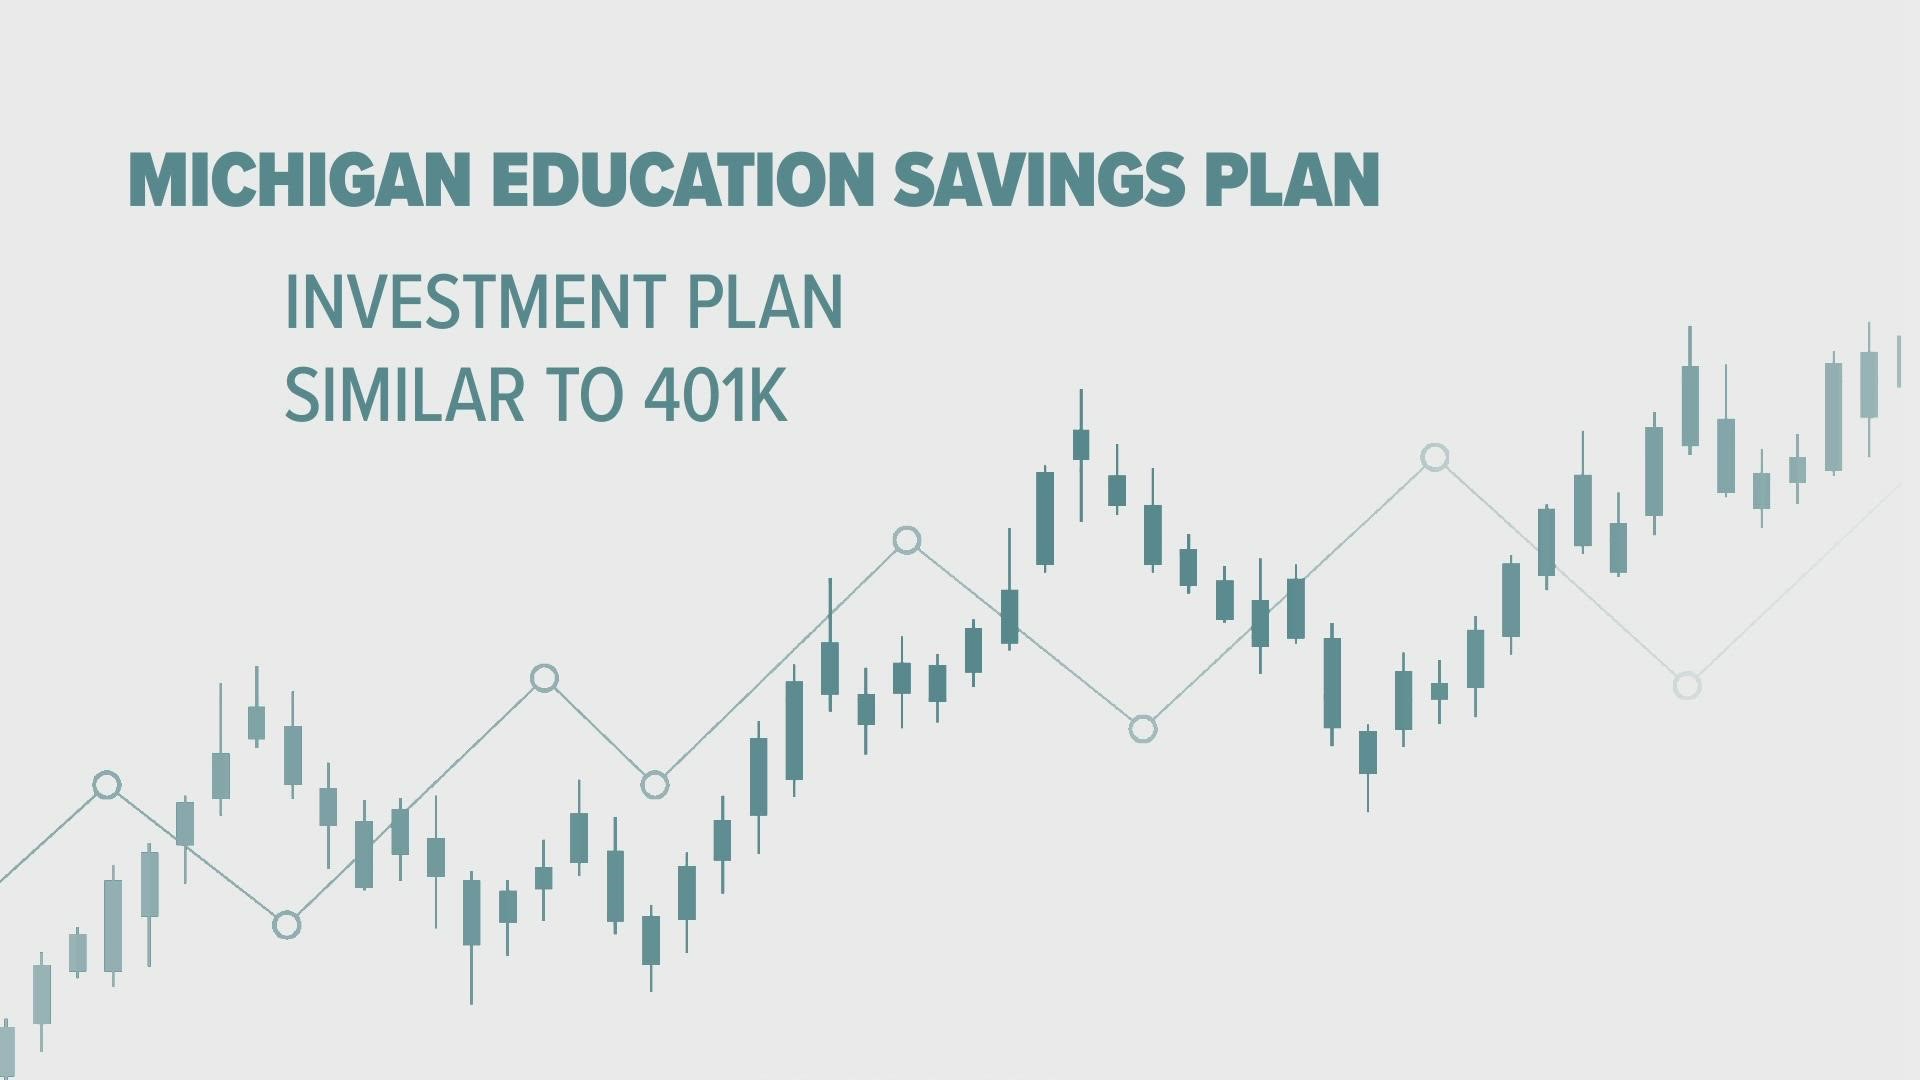 A 529 plan helps families save for future education expenses. The two most common plans in Michigan are the MET and the MESP.